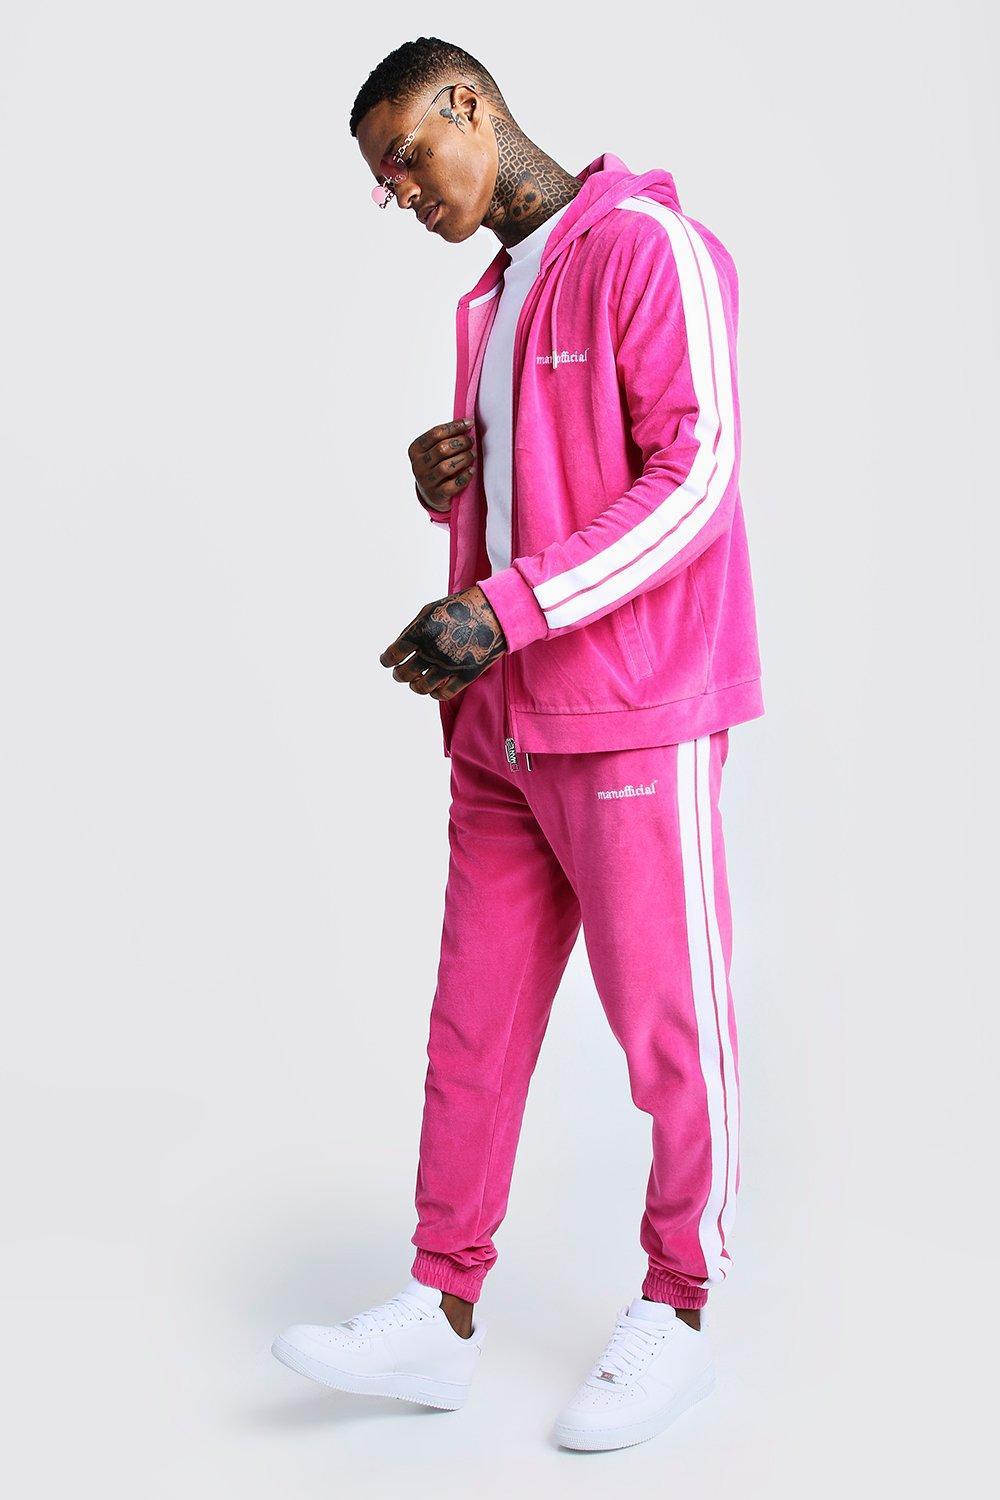 BoohooMAN Man Official Velour Tracksuit With Side Tape in Pink for